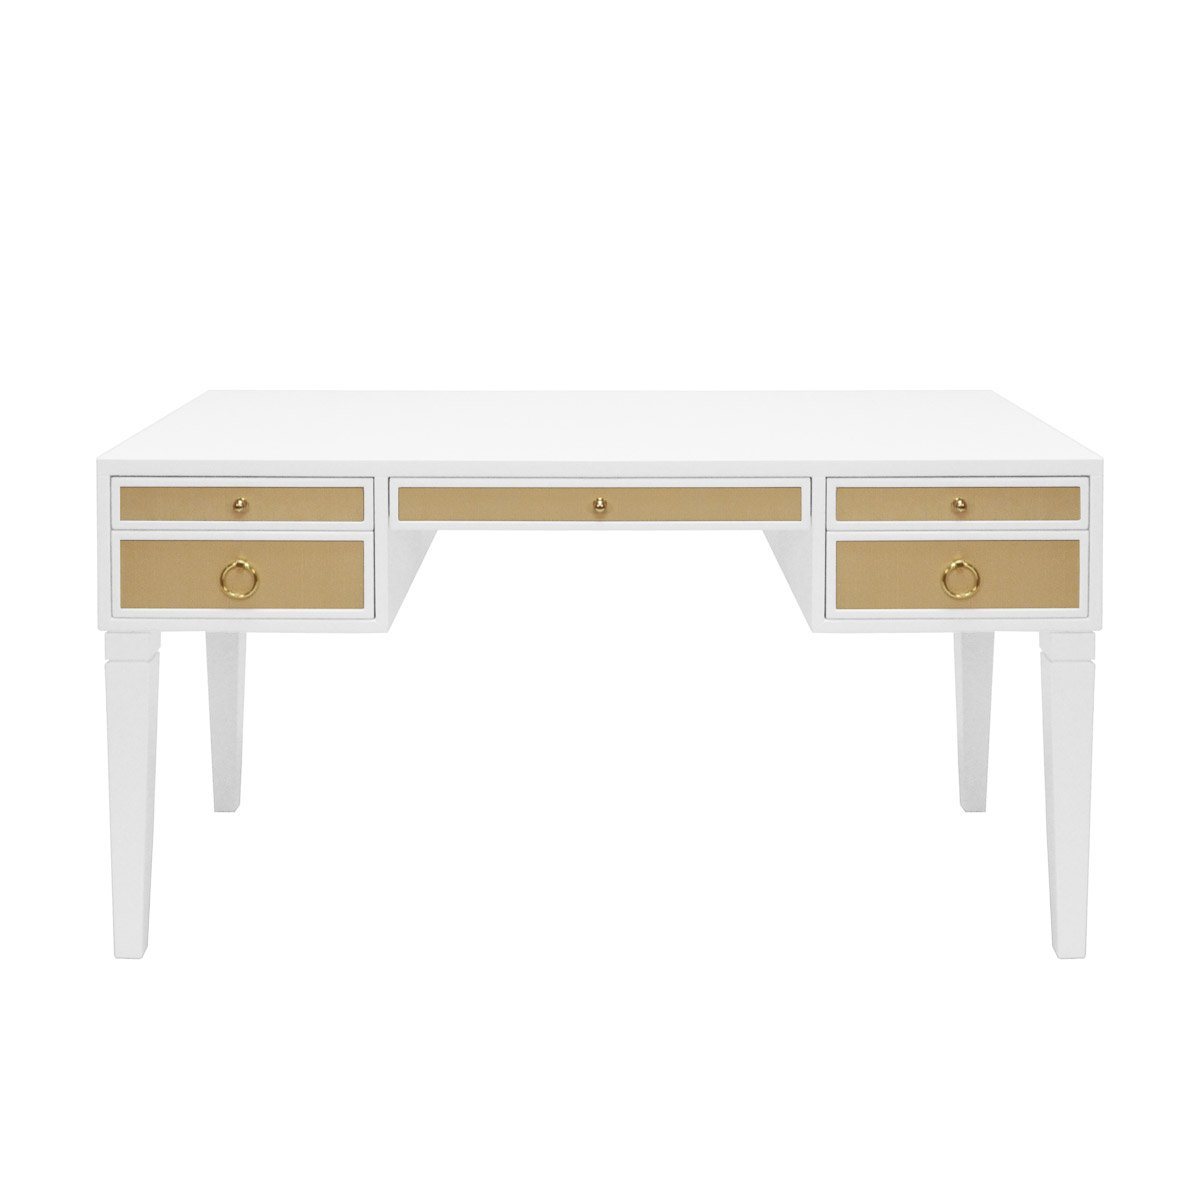 Adelaide Desk Matte White Lacquer & Natural Grasscloth | Polished Brass. Front view.